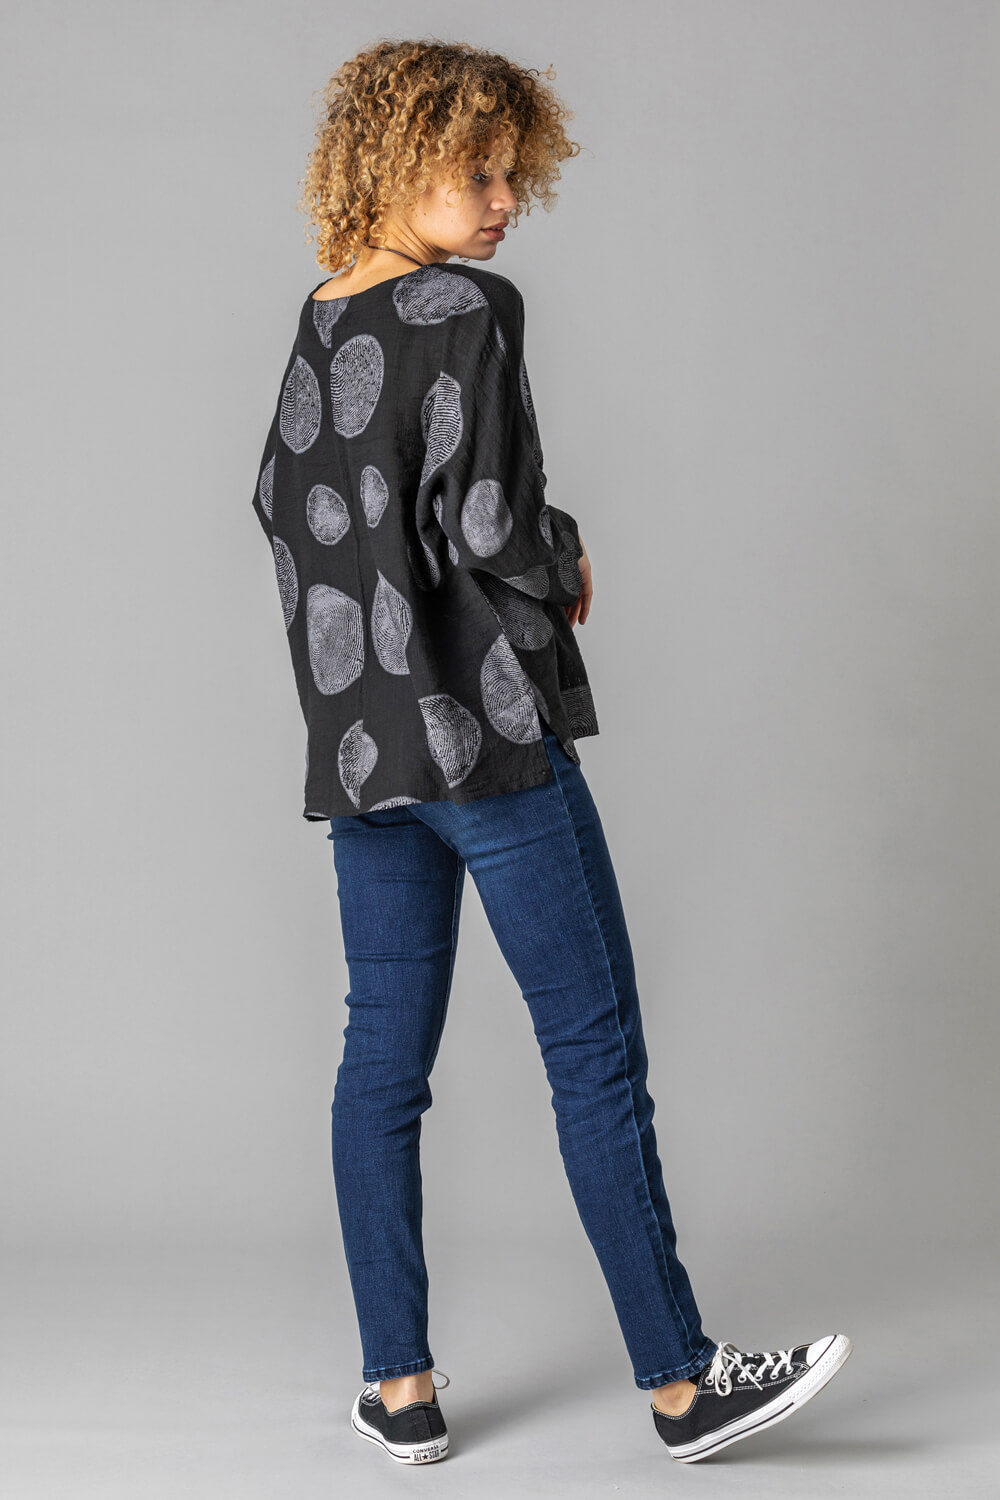 Black Spot Print Top with Necklace, Image 3 of 4